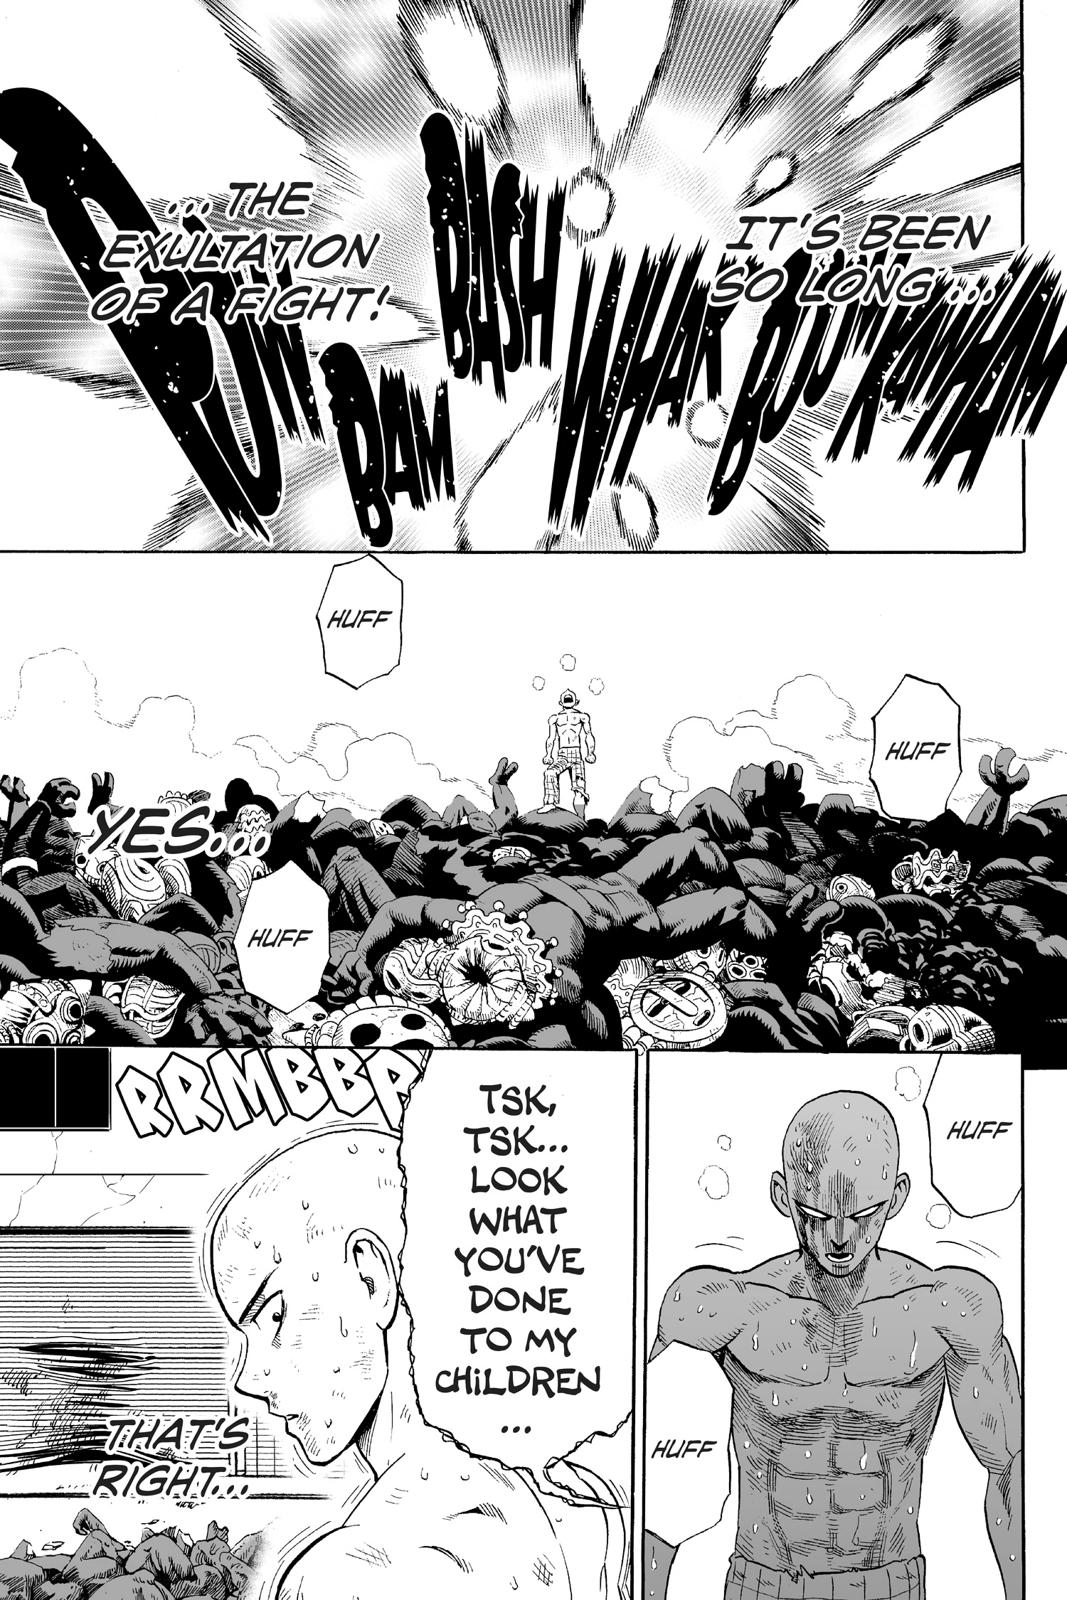 One-Punch Man, Punch 4 image 18